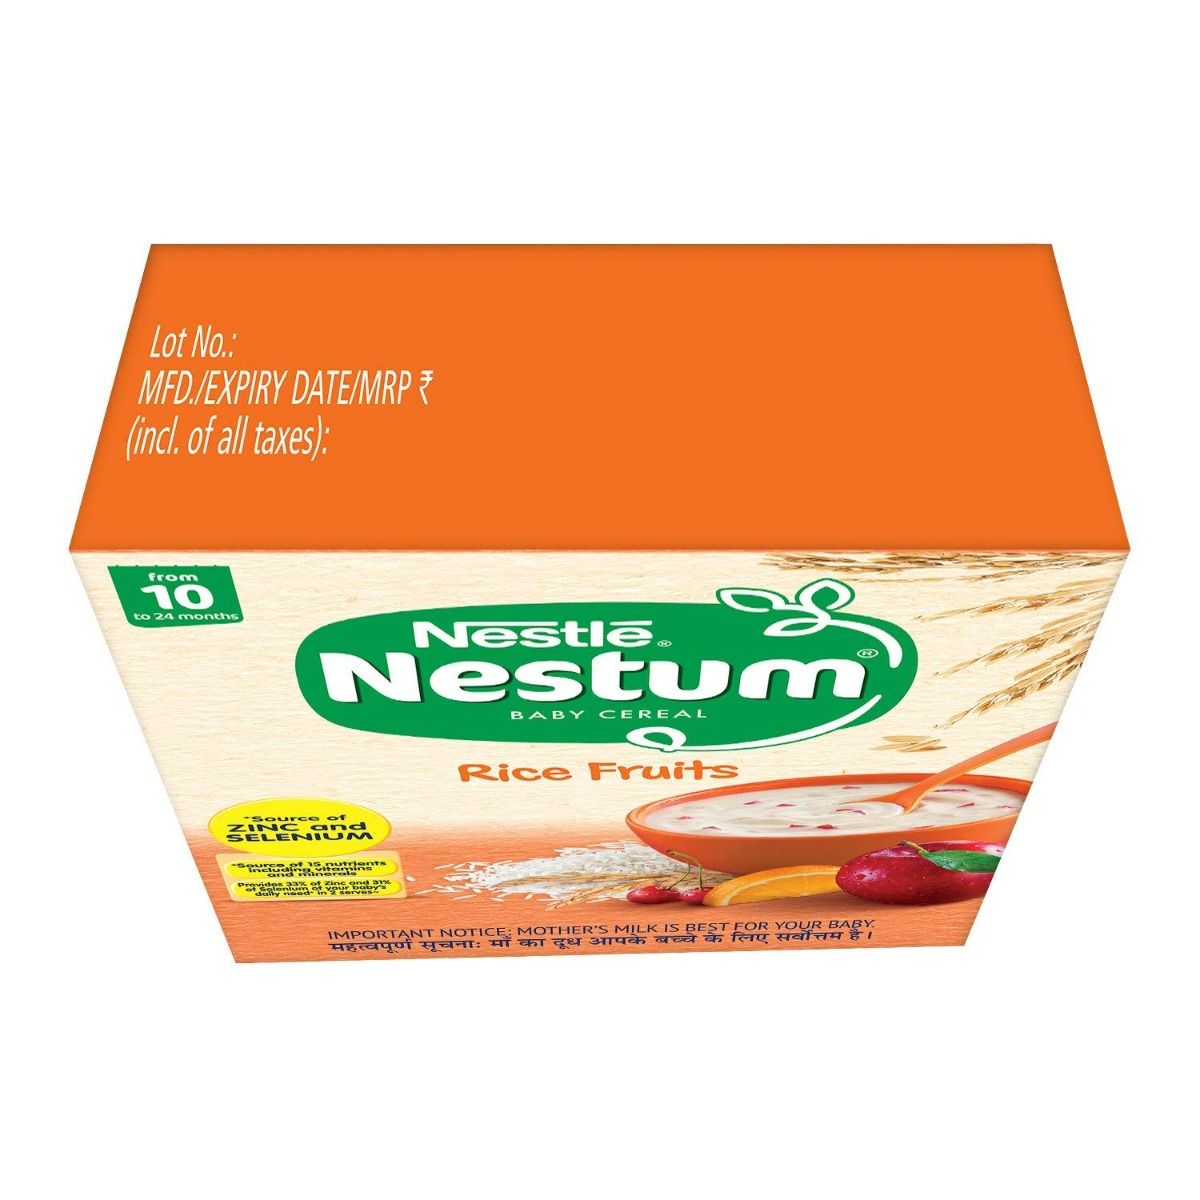 Nestle Nestum Baby Cereal Rice Fruits, From 10 to 24 months, 300 gm Refill Pack, Pack of 1 